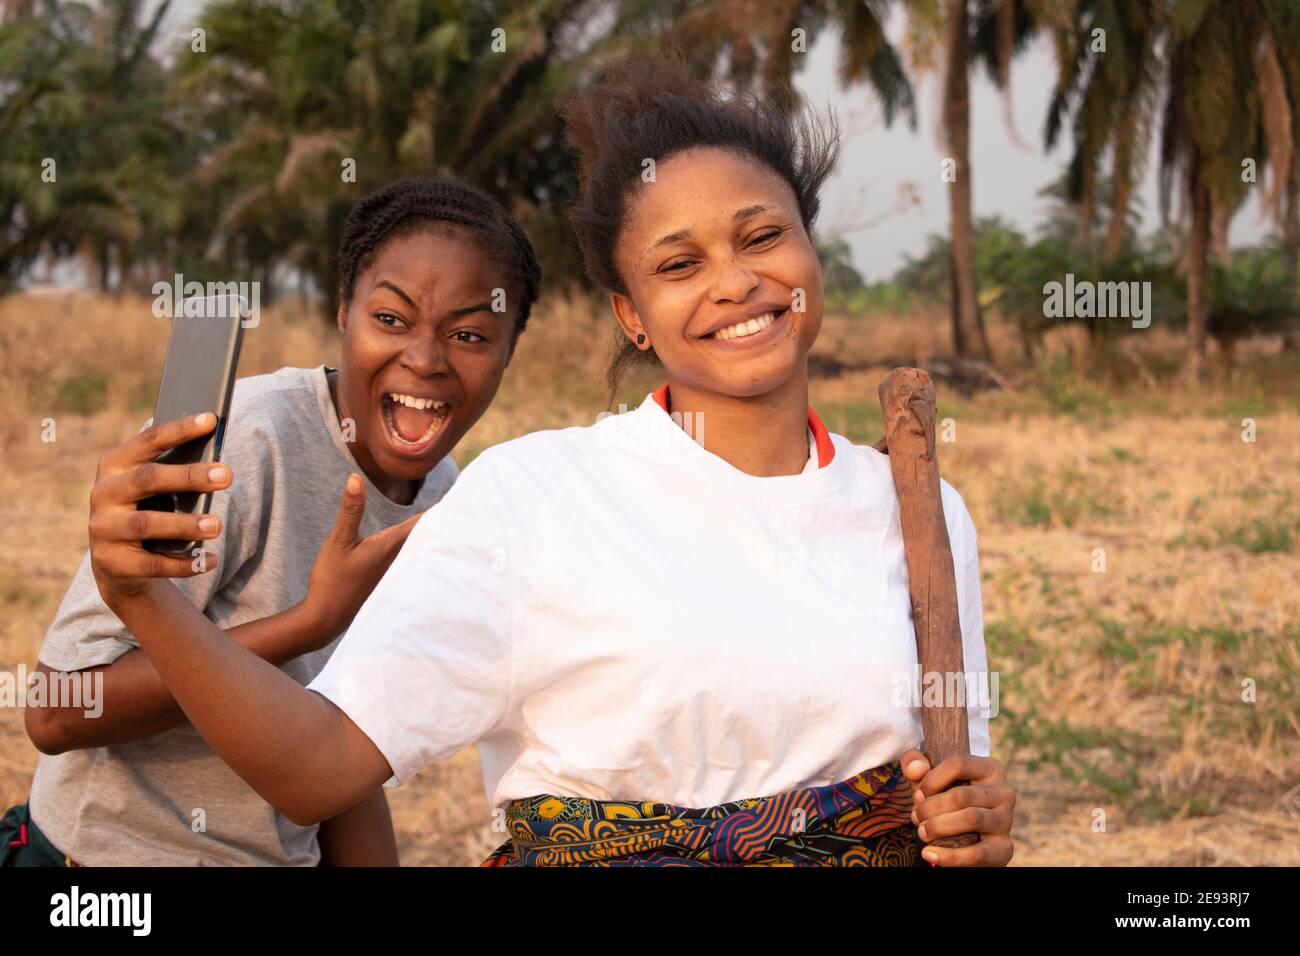 two women using a mobile phone at a farmland Stock Photo